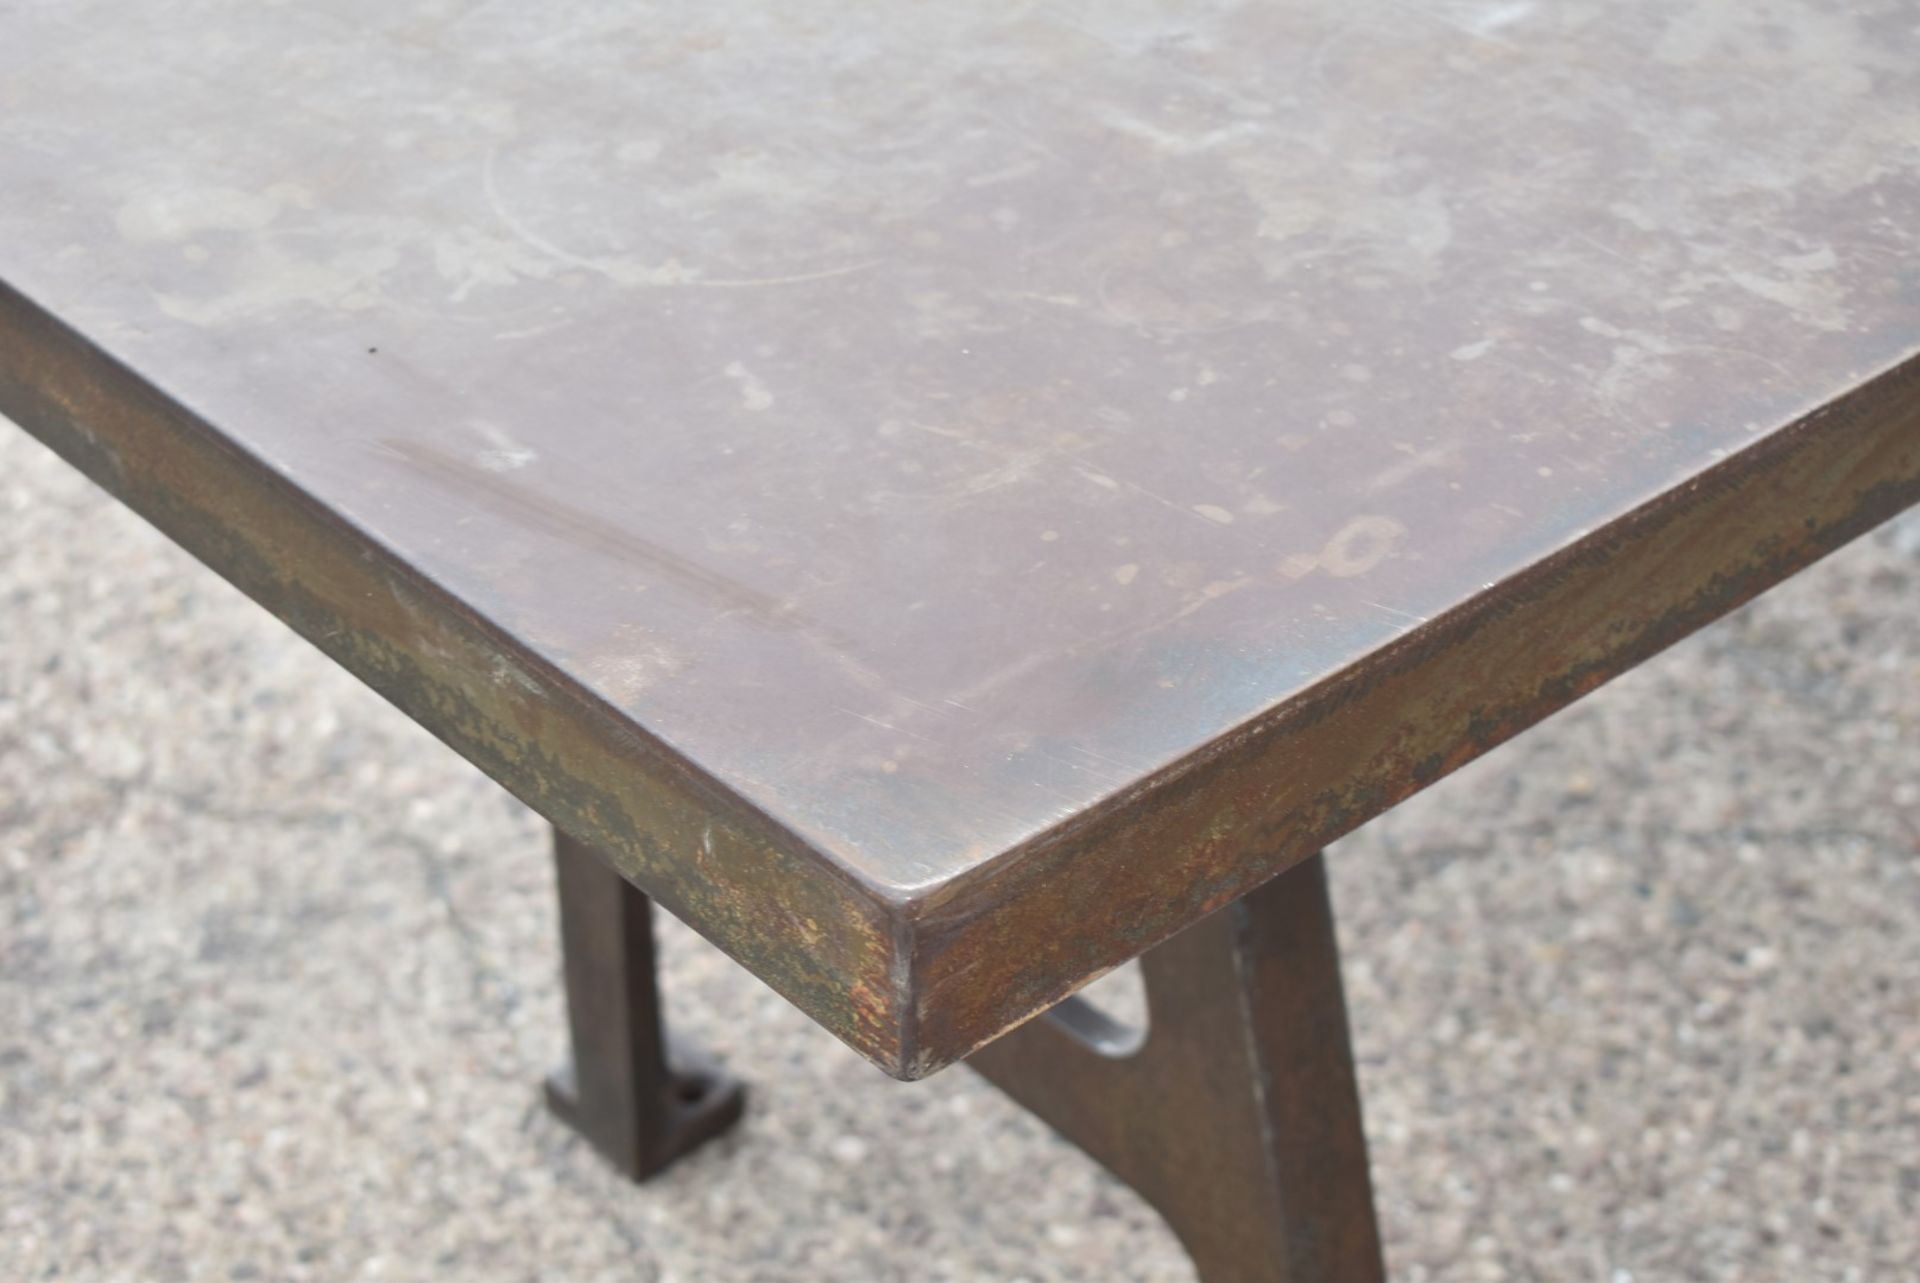 1 x Industrial Style 200cm Banquetting Restaurant Table Featuring a Heavy Steel Top & Steel Legs - Image 8 of 23